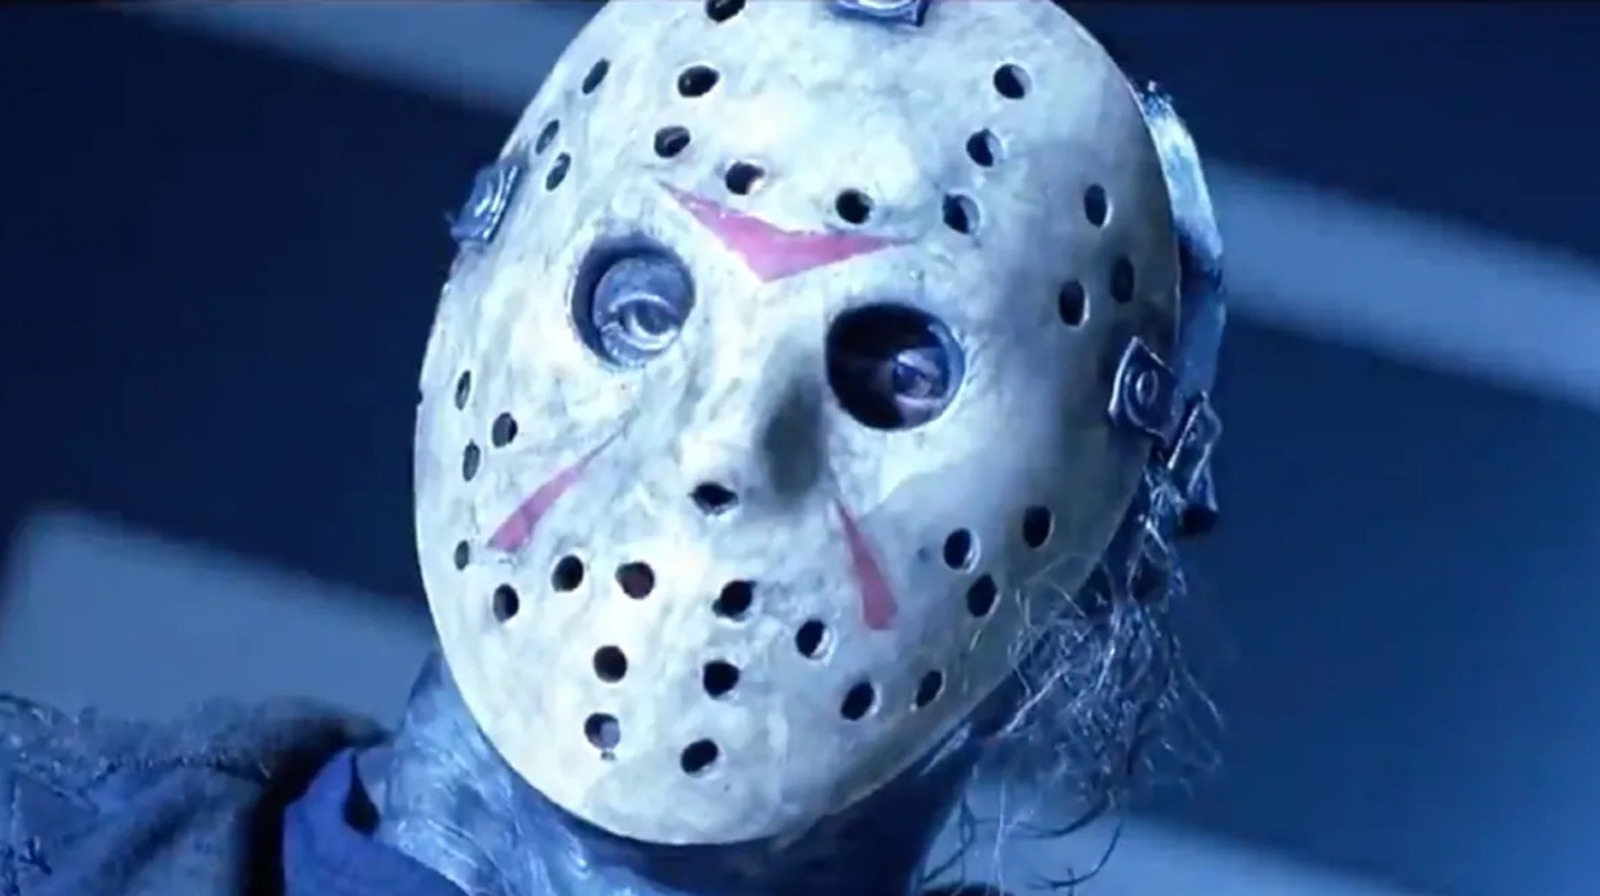 Jason Voorhees' Most Brutal Friday The 13th Kill Scenes Ranked By Sava